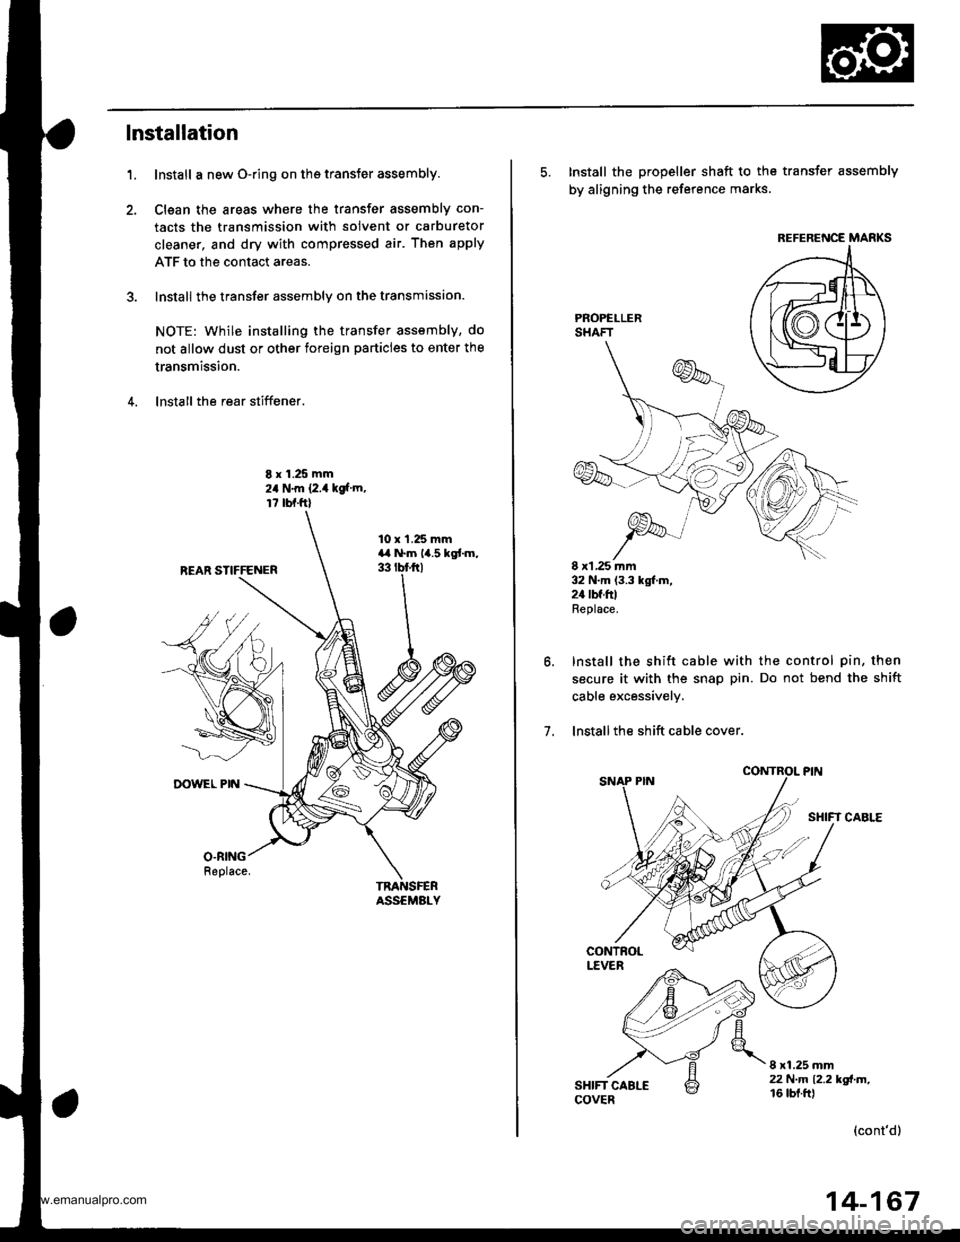 HONDA CR-V 1997 RD1-RD3 / 1.G Workshop Manual 
lnstallation
Install a new O-ring on ths transfer assembly.
Clsan the areas where the transfer assembly con-
tacts the transmission with solvent or carburetor
cleaner, and dry with compressed air. Th